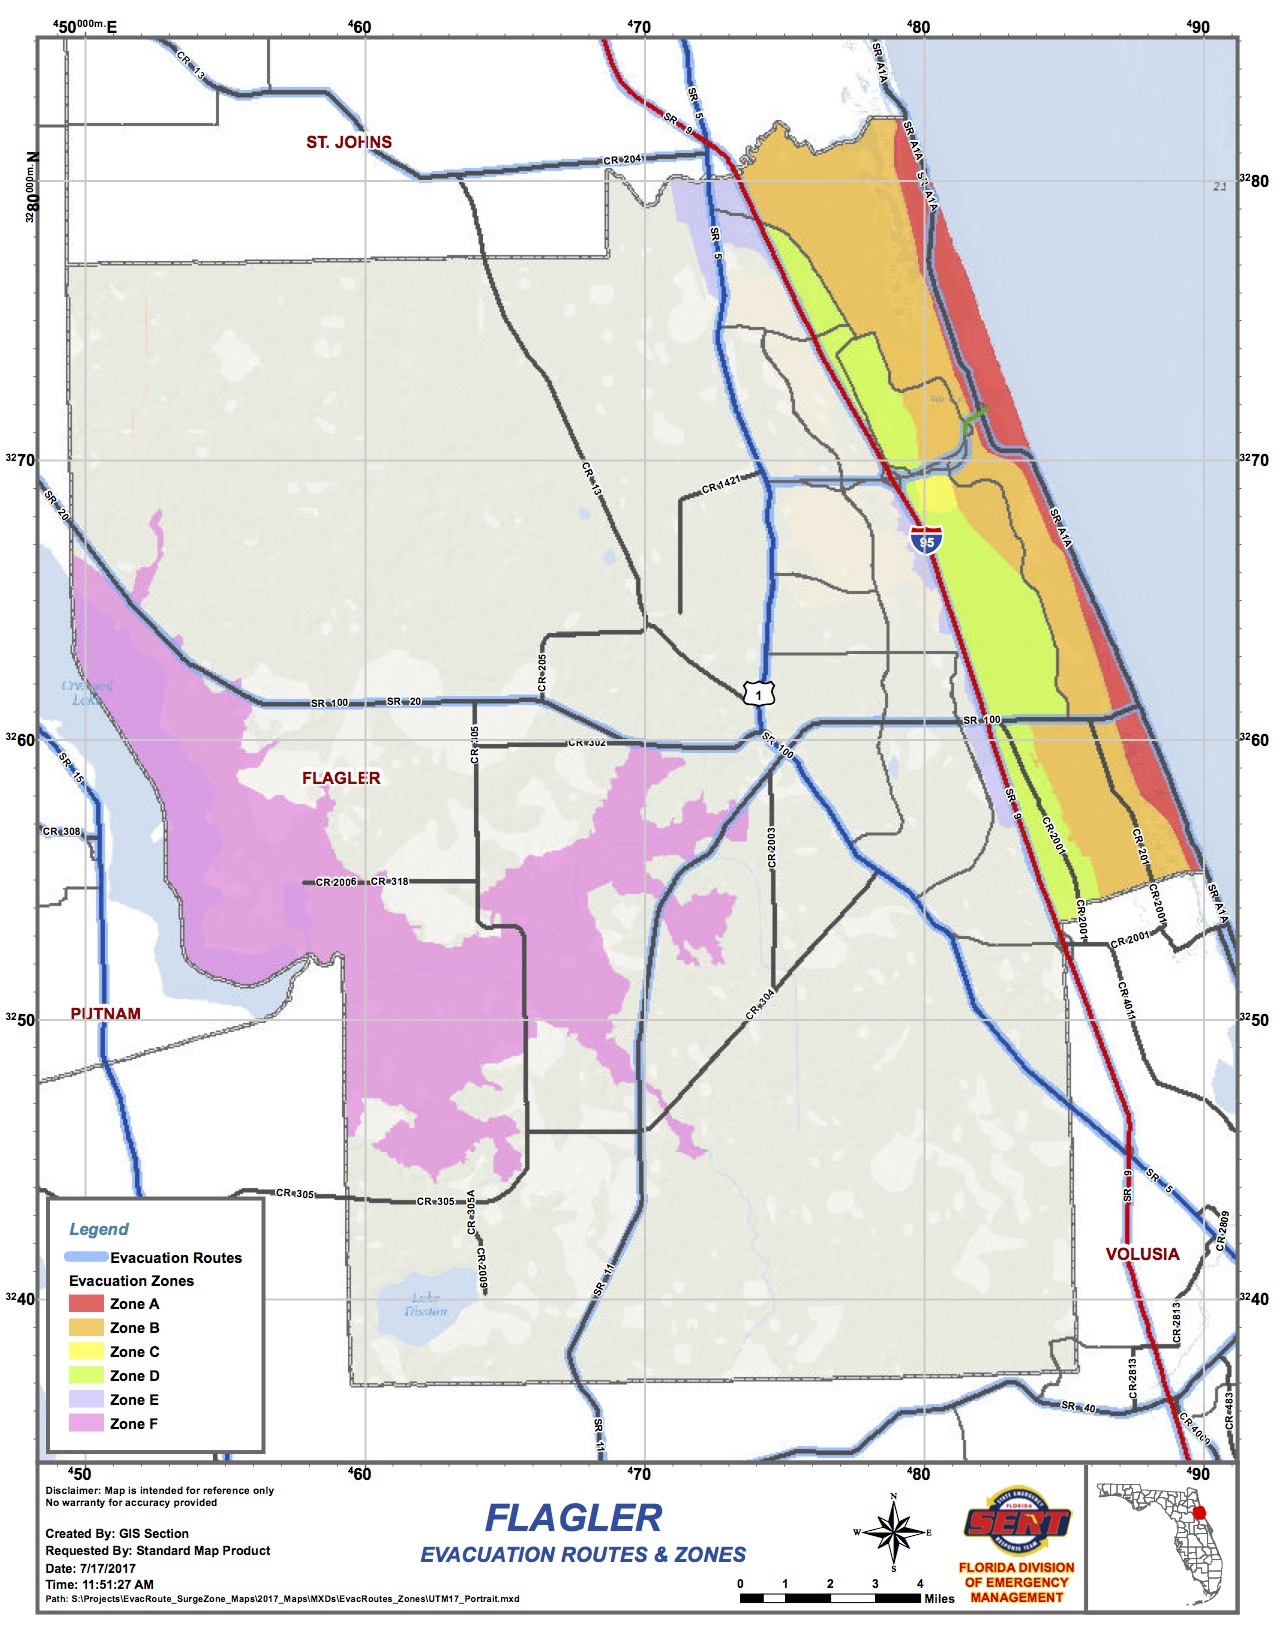 Evacuation zones A and F (red and pink) are now mandatory evacuation area.